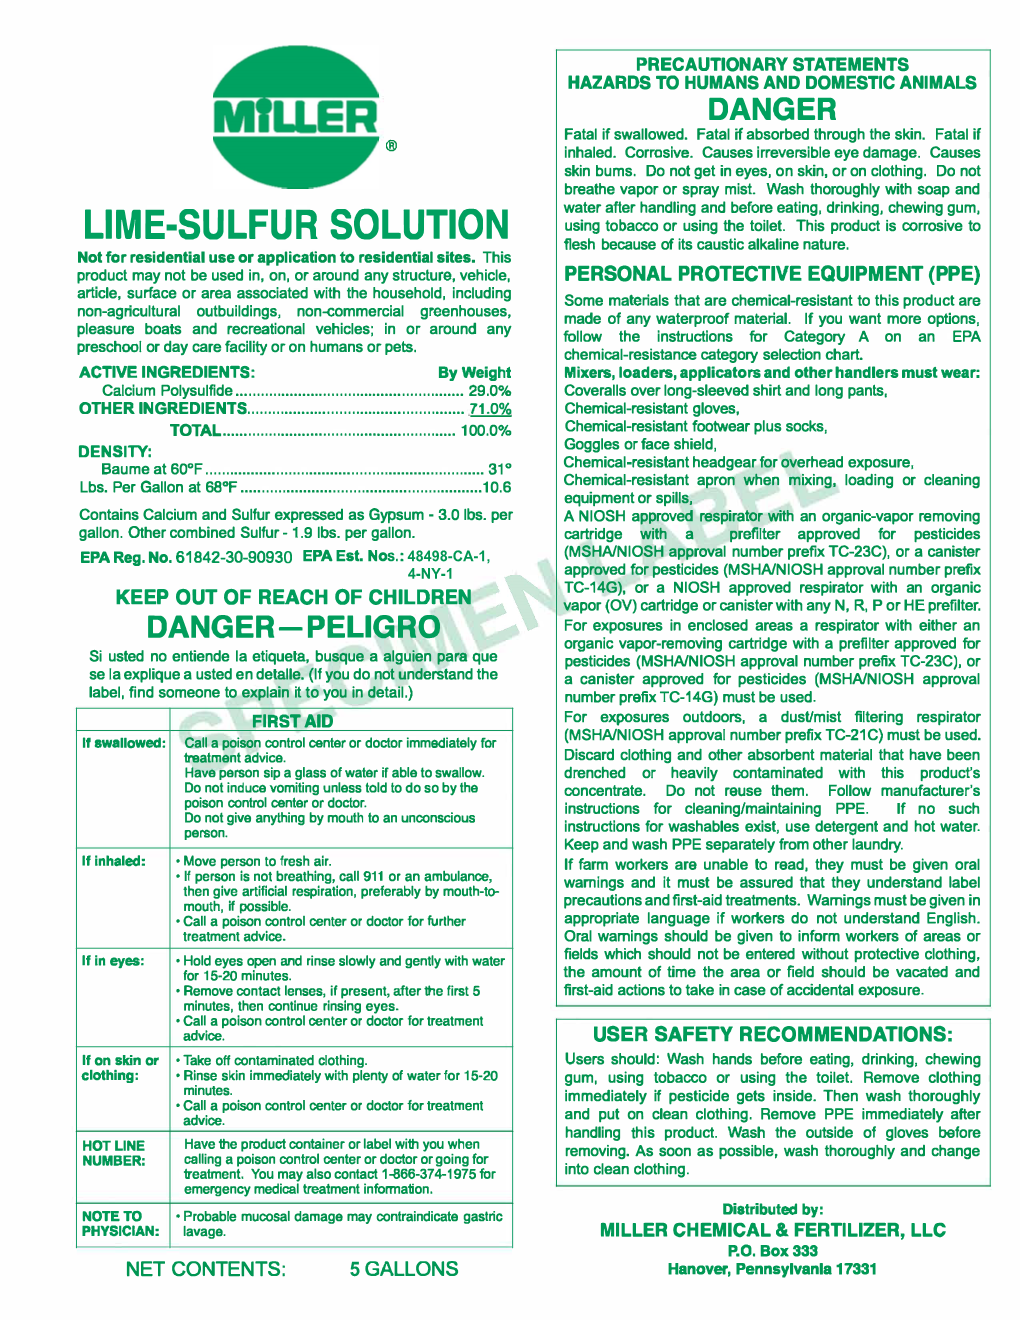 LIME-SULFUR SOLUTION Flesh Because of Its Caustic Alkaline Nature